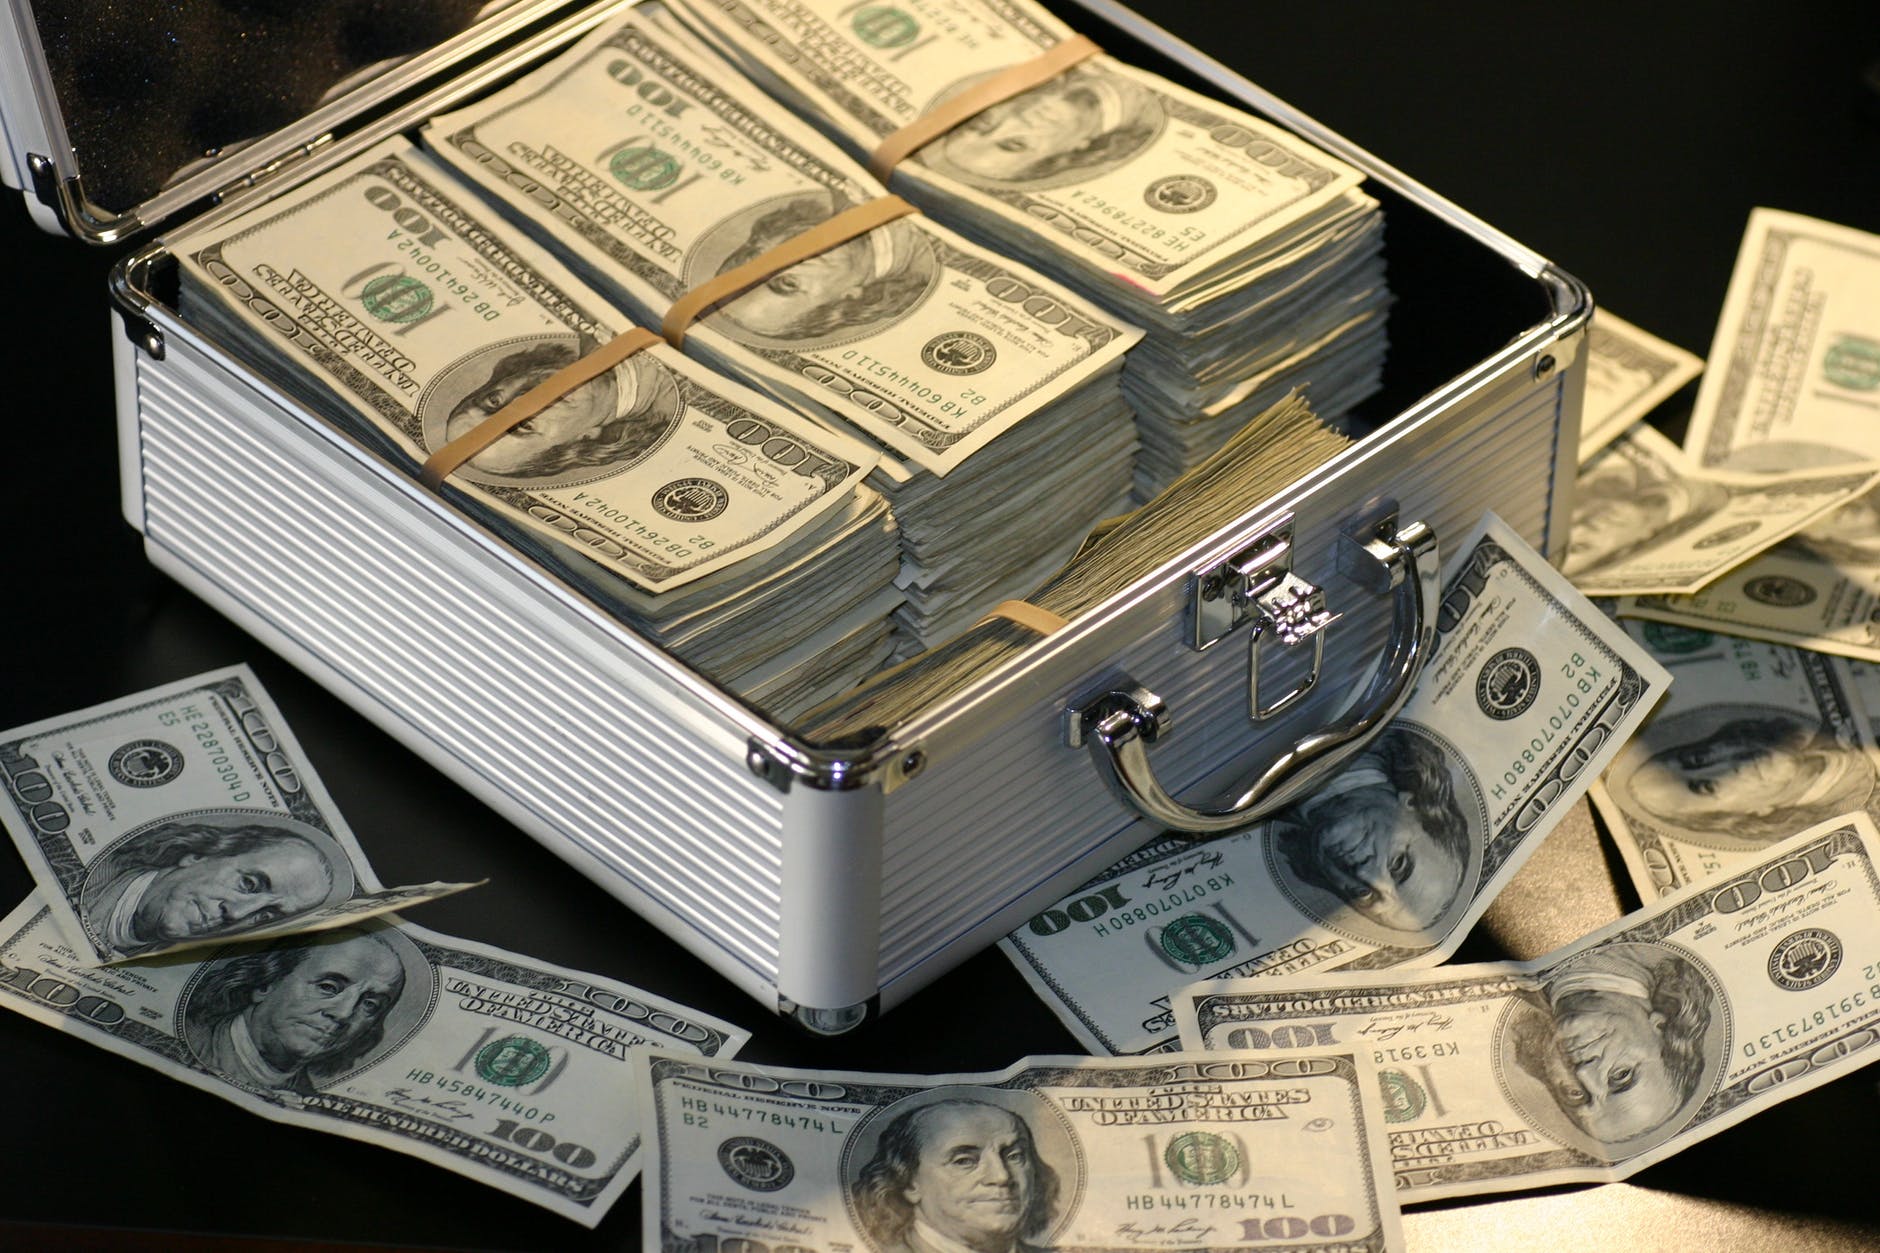 This is a picture of a drug company bribes of cash in a brief case that embodies a illegal bribes that come in many forms.